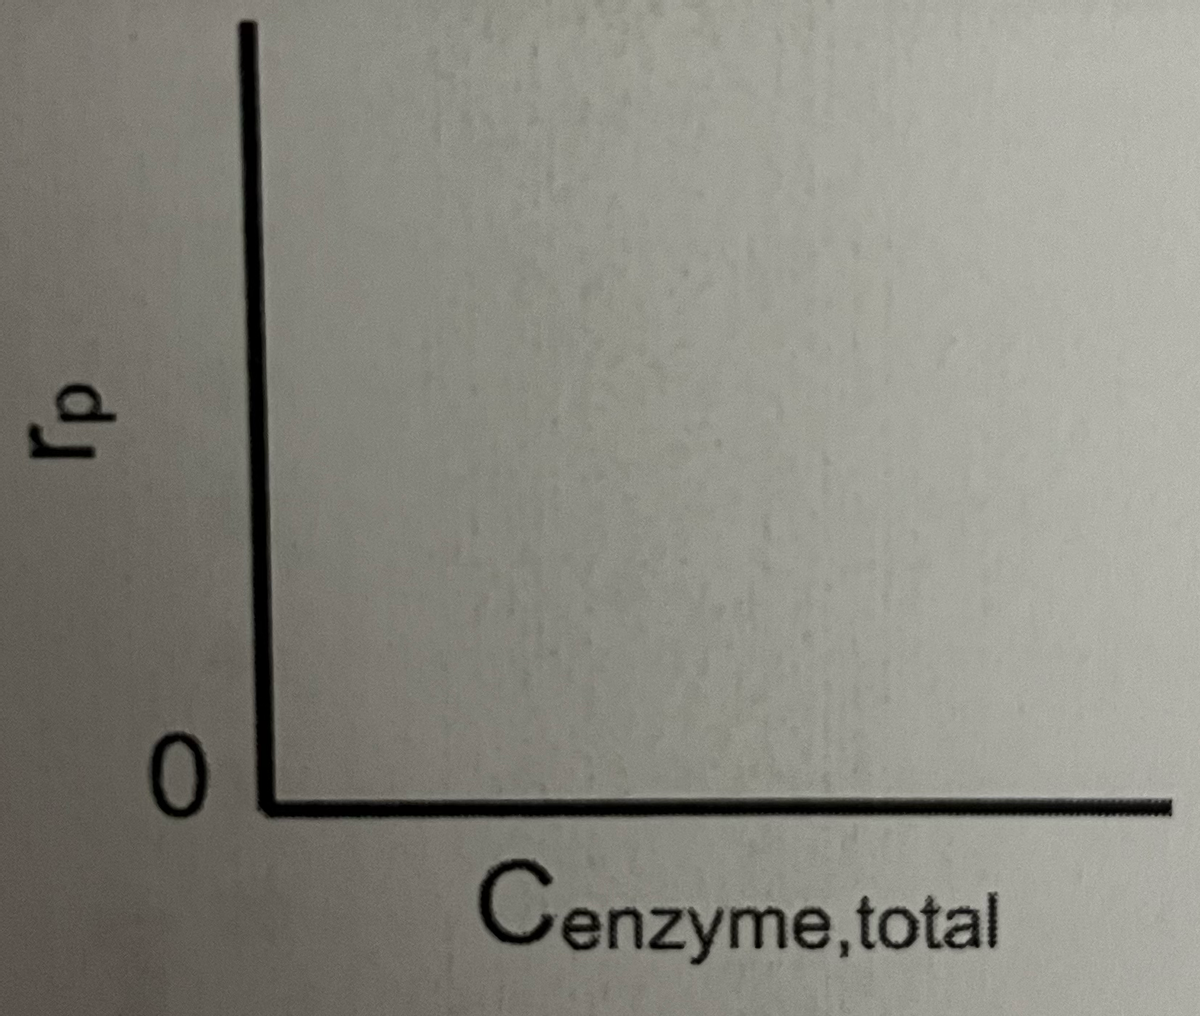 rp
0
Cenzyme,total